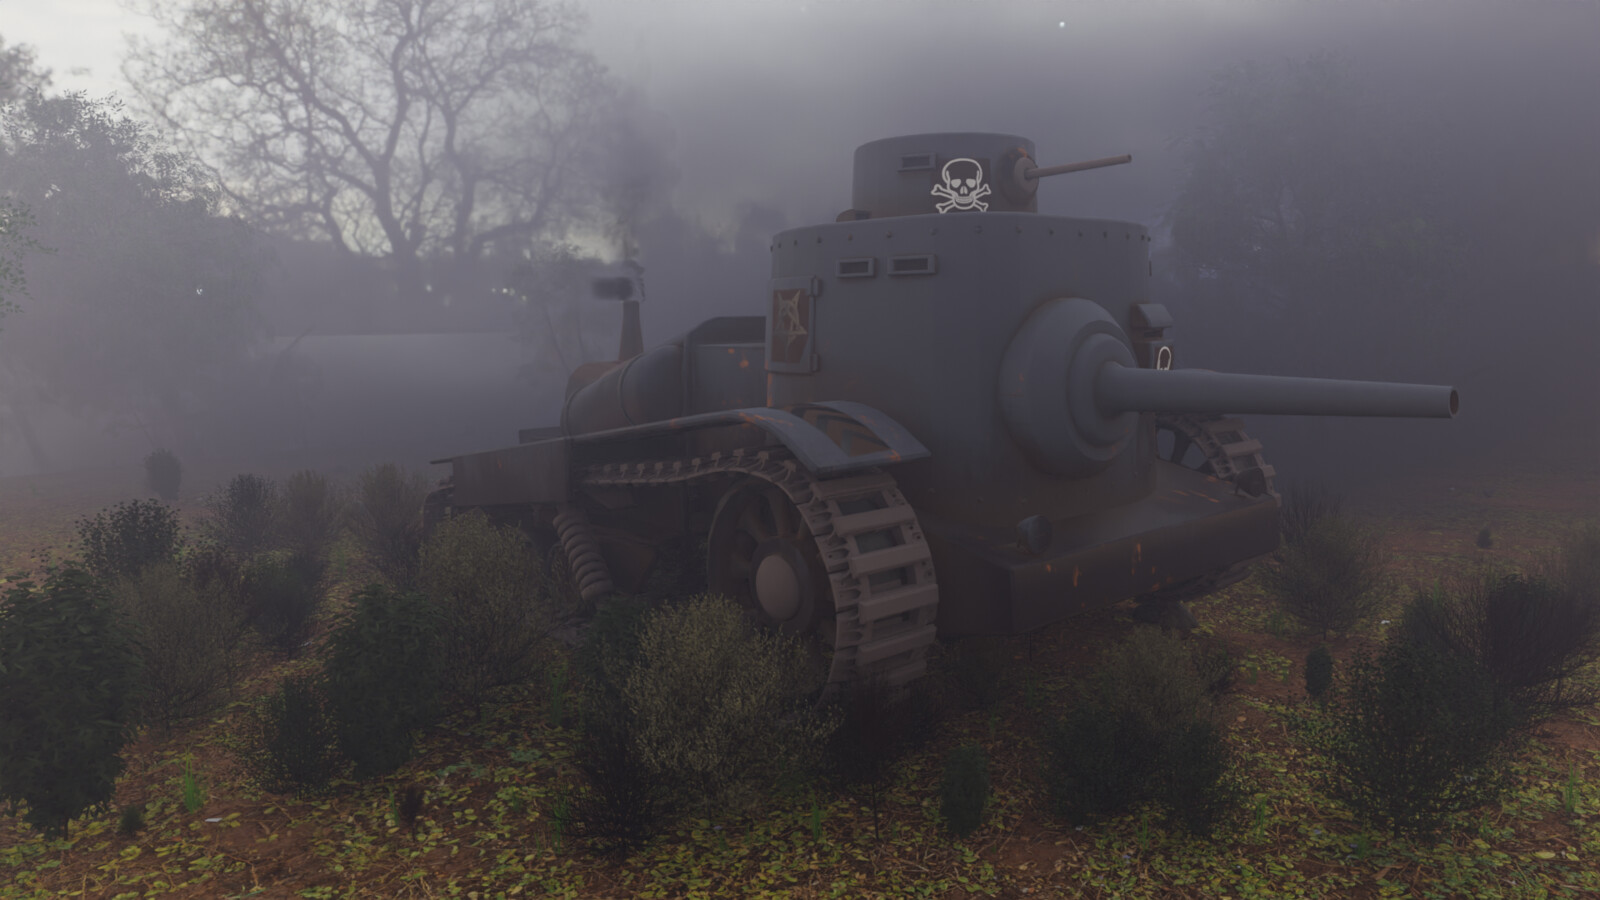 Quick Tank with decals and bushes, render with cycles and denoise,
final for now